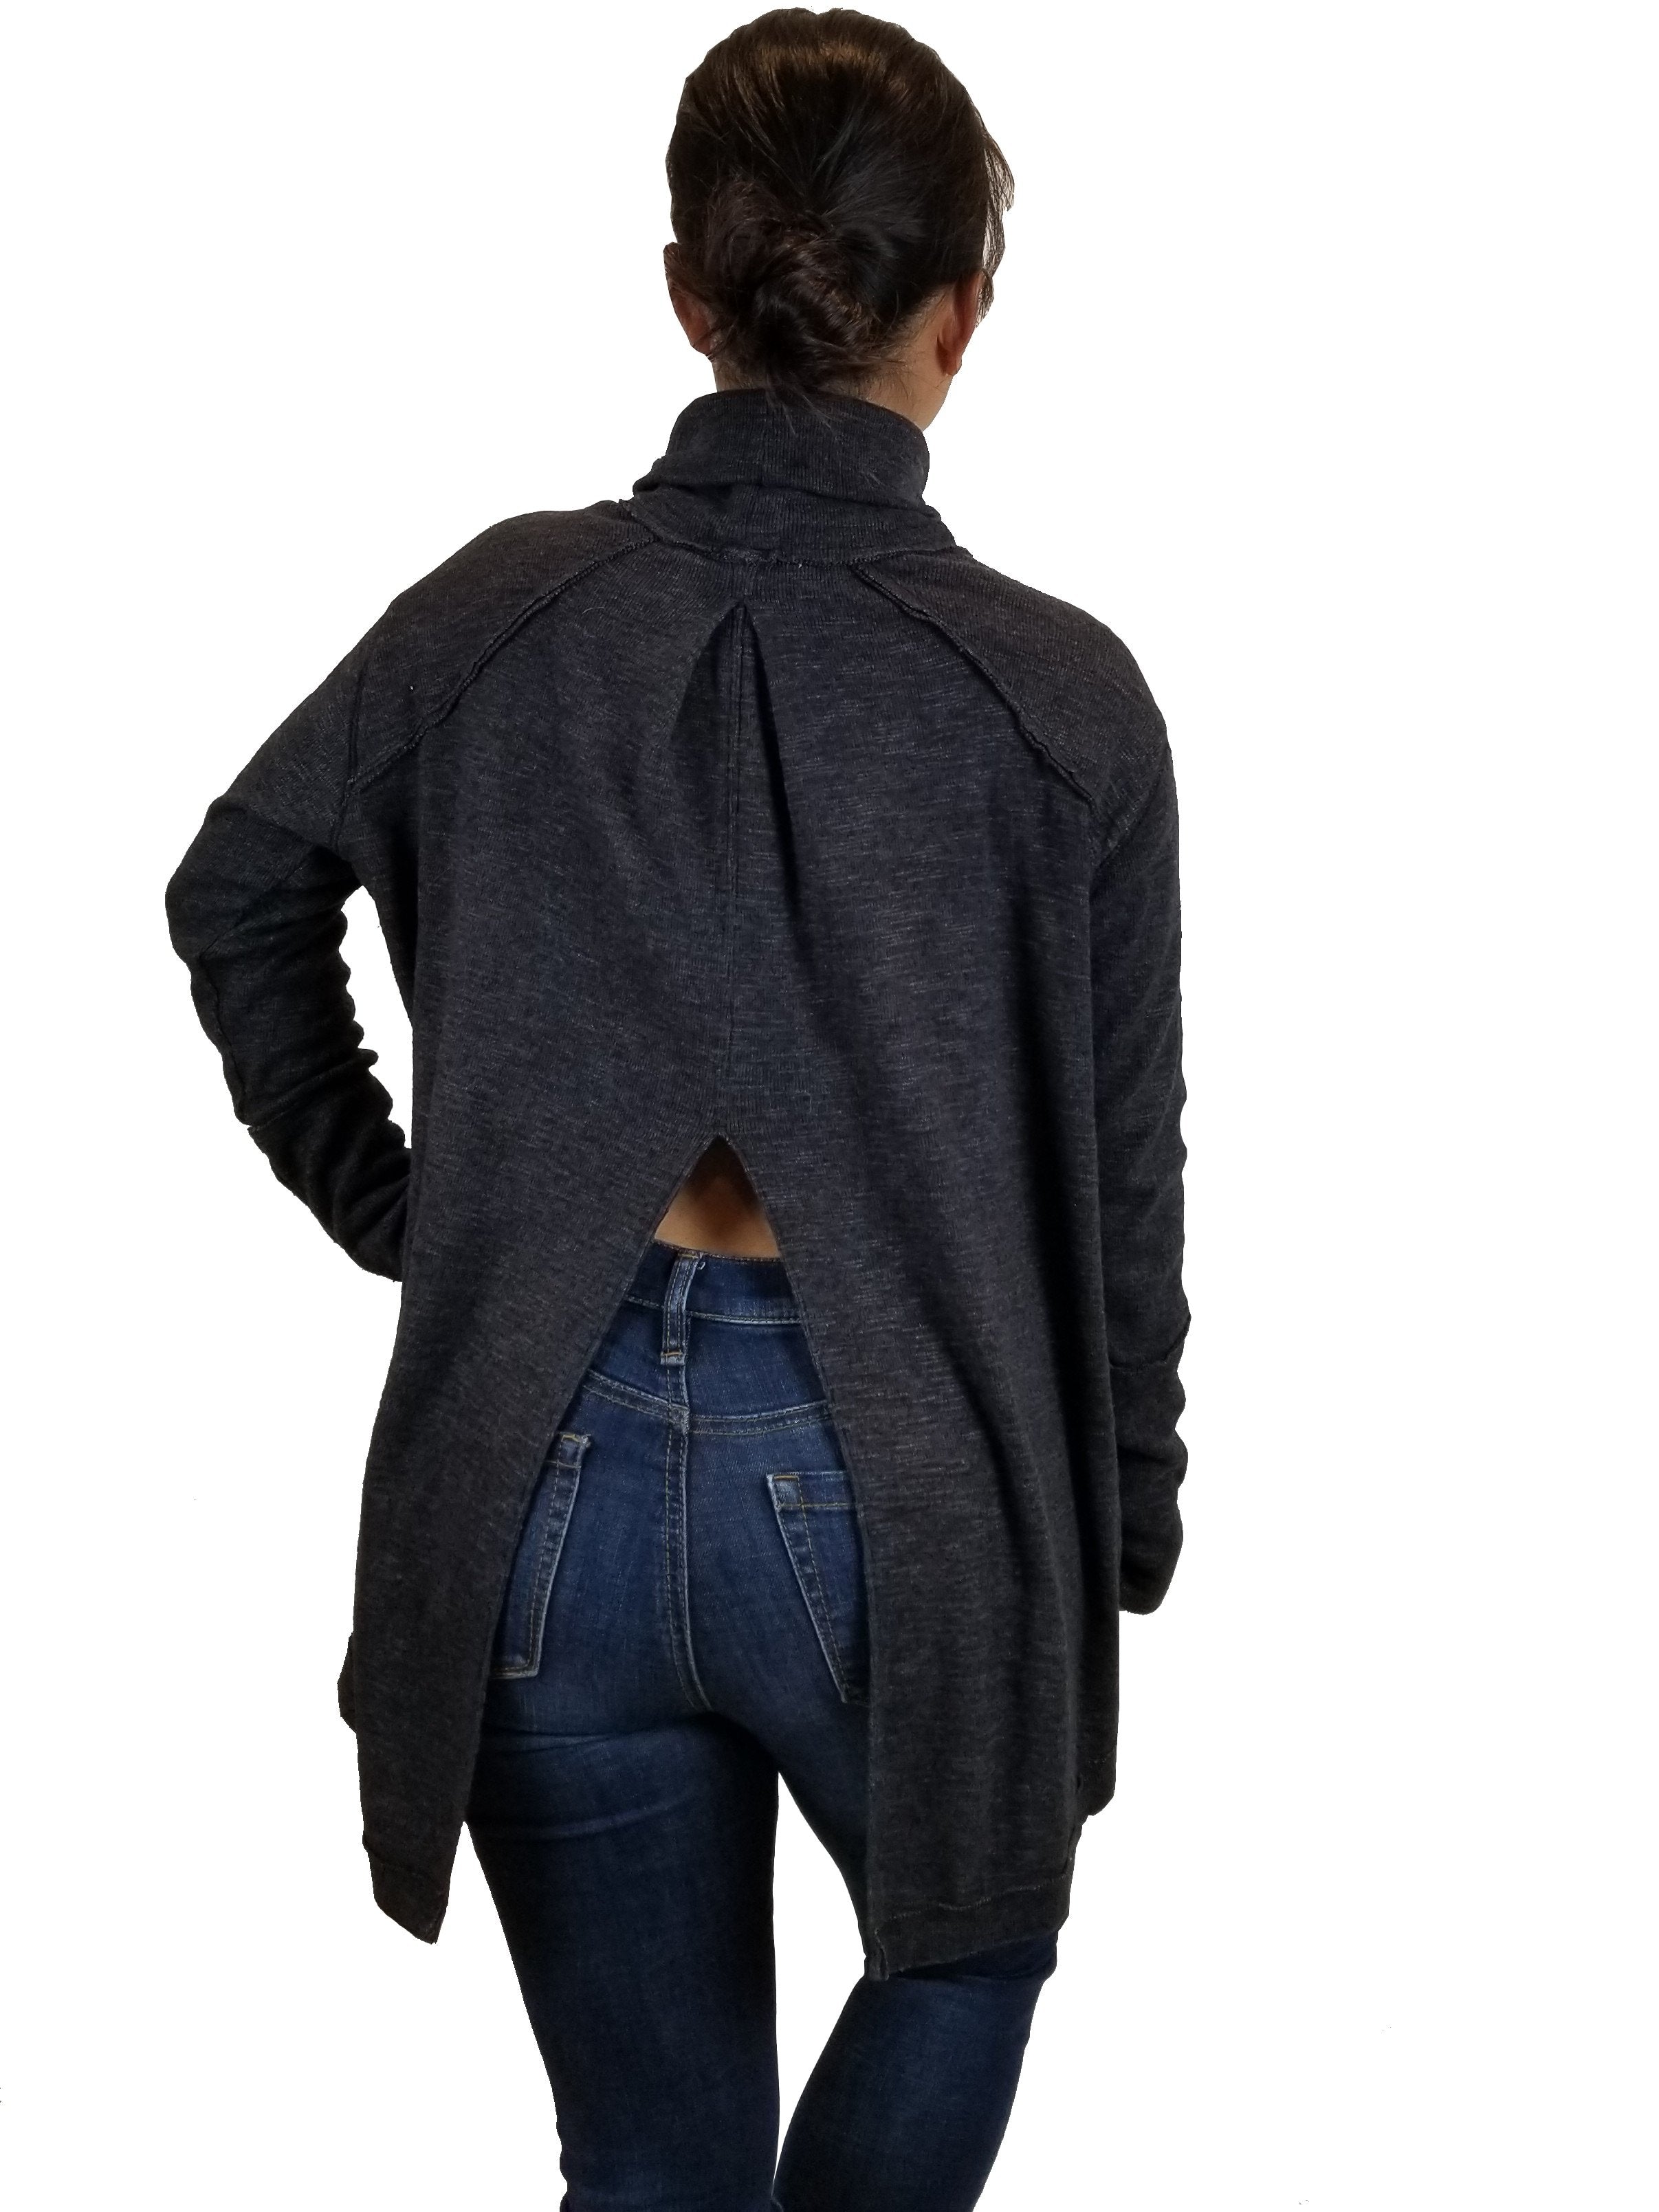 We the free Women's Turtleneck Pullover, Flowy turtleneck pullover for a comfy yet elegant look, Grey, 50% Polyester, 38% Cotton, 12% Rayon, sweater, shirt, turtleneck, loose sweater, women's black turtleneck with open back